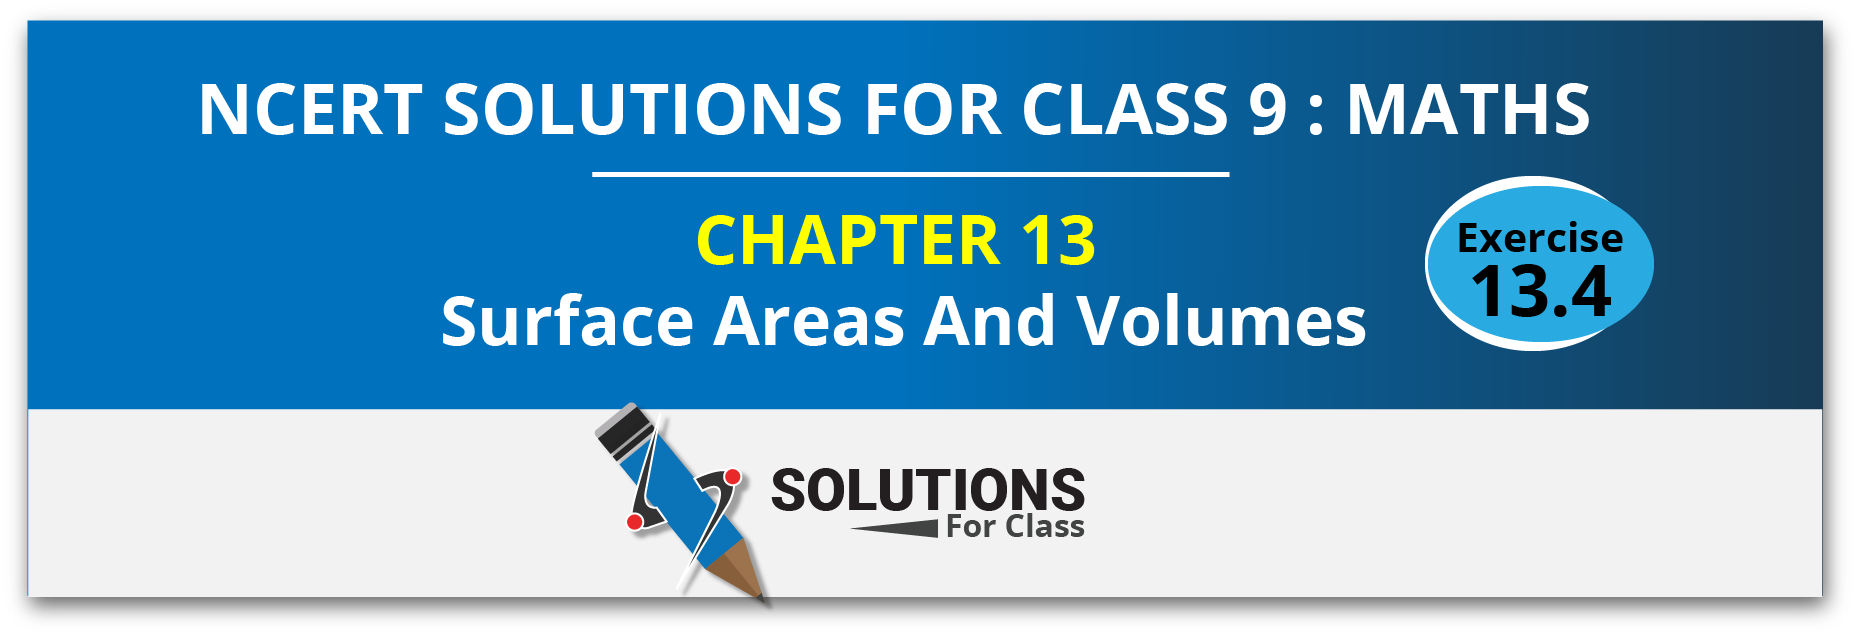 NCERT Solutions for Class 9 Maths Chapter 13 Surface Areas and Volumes Ex 13.4